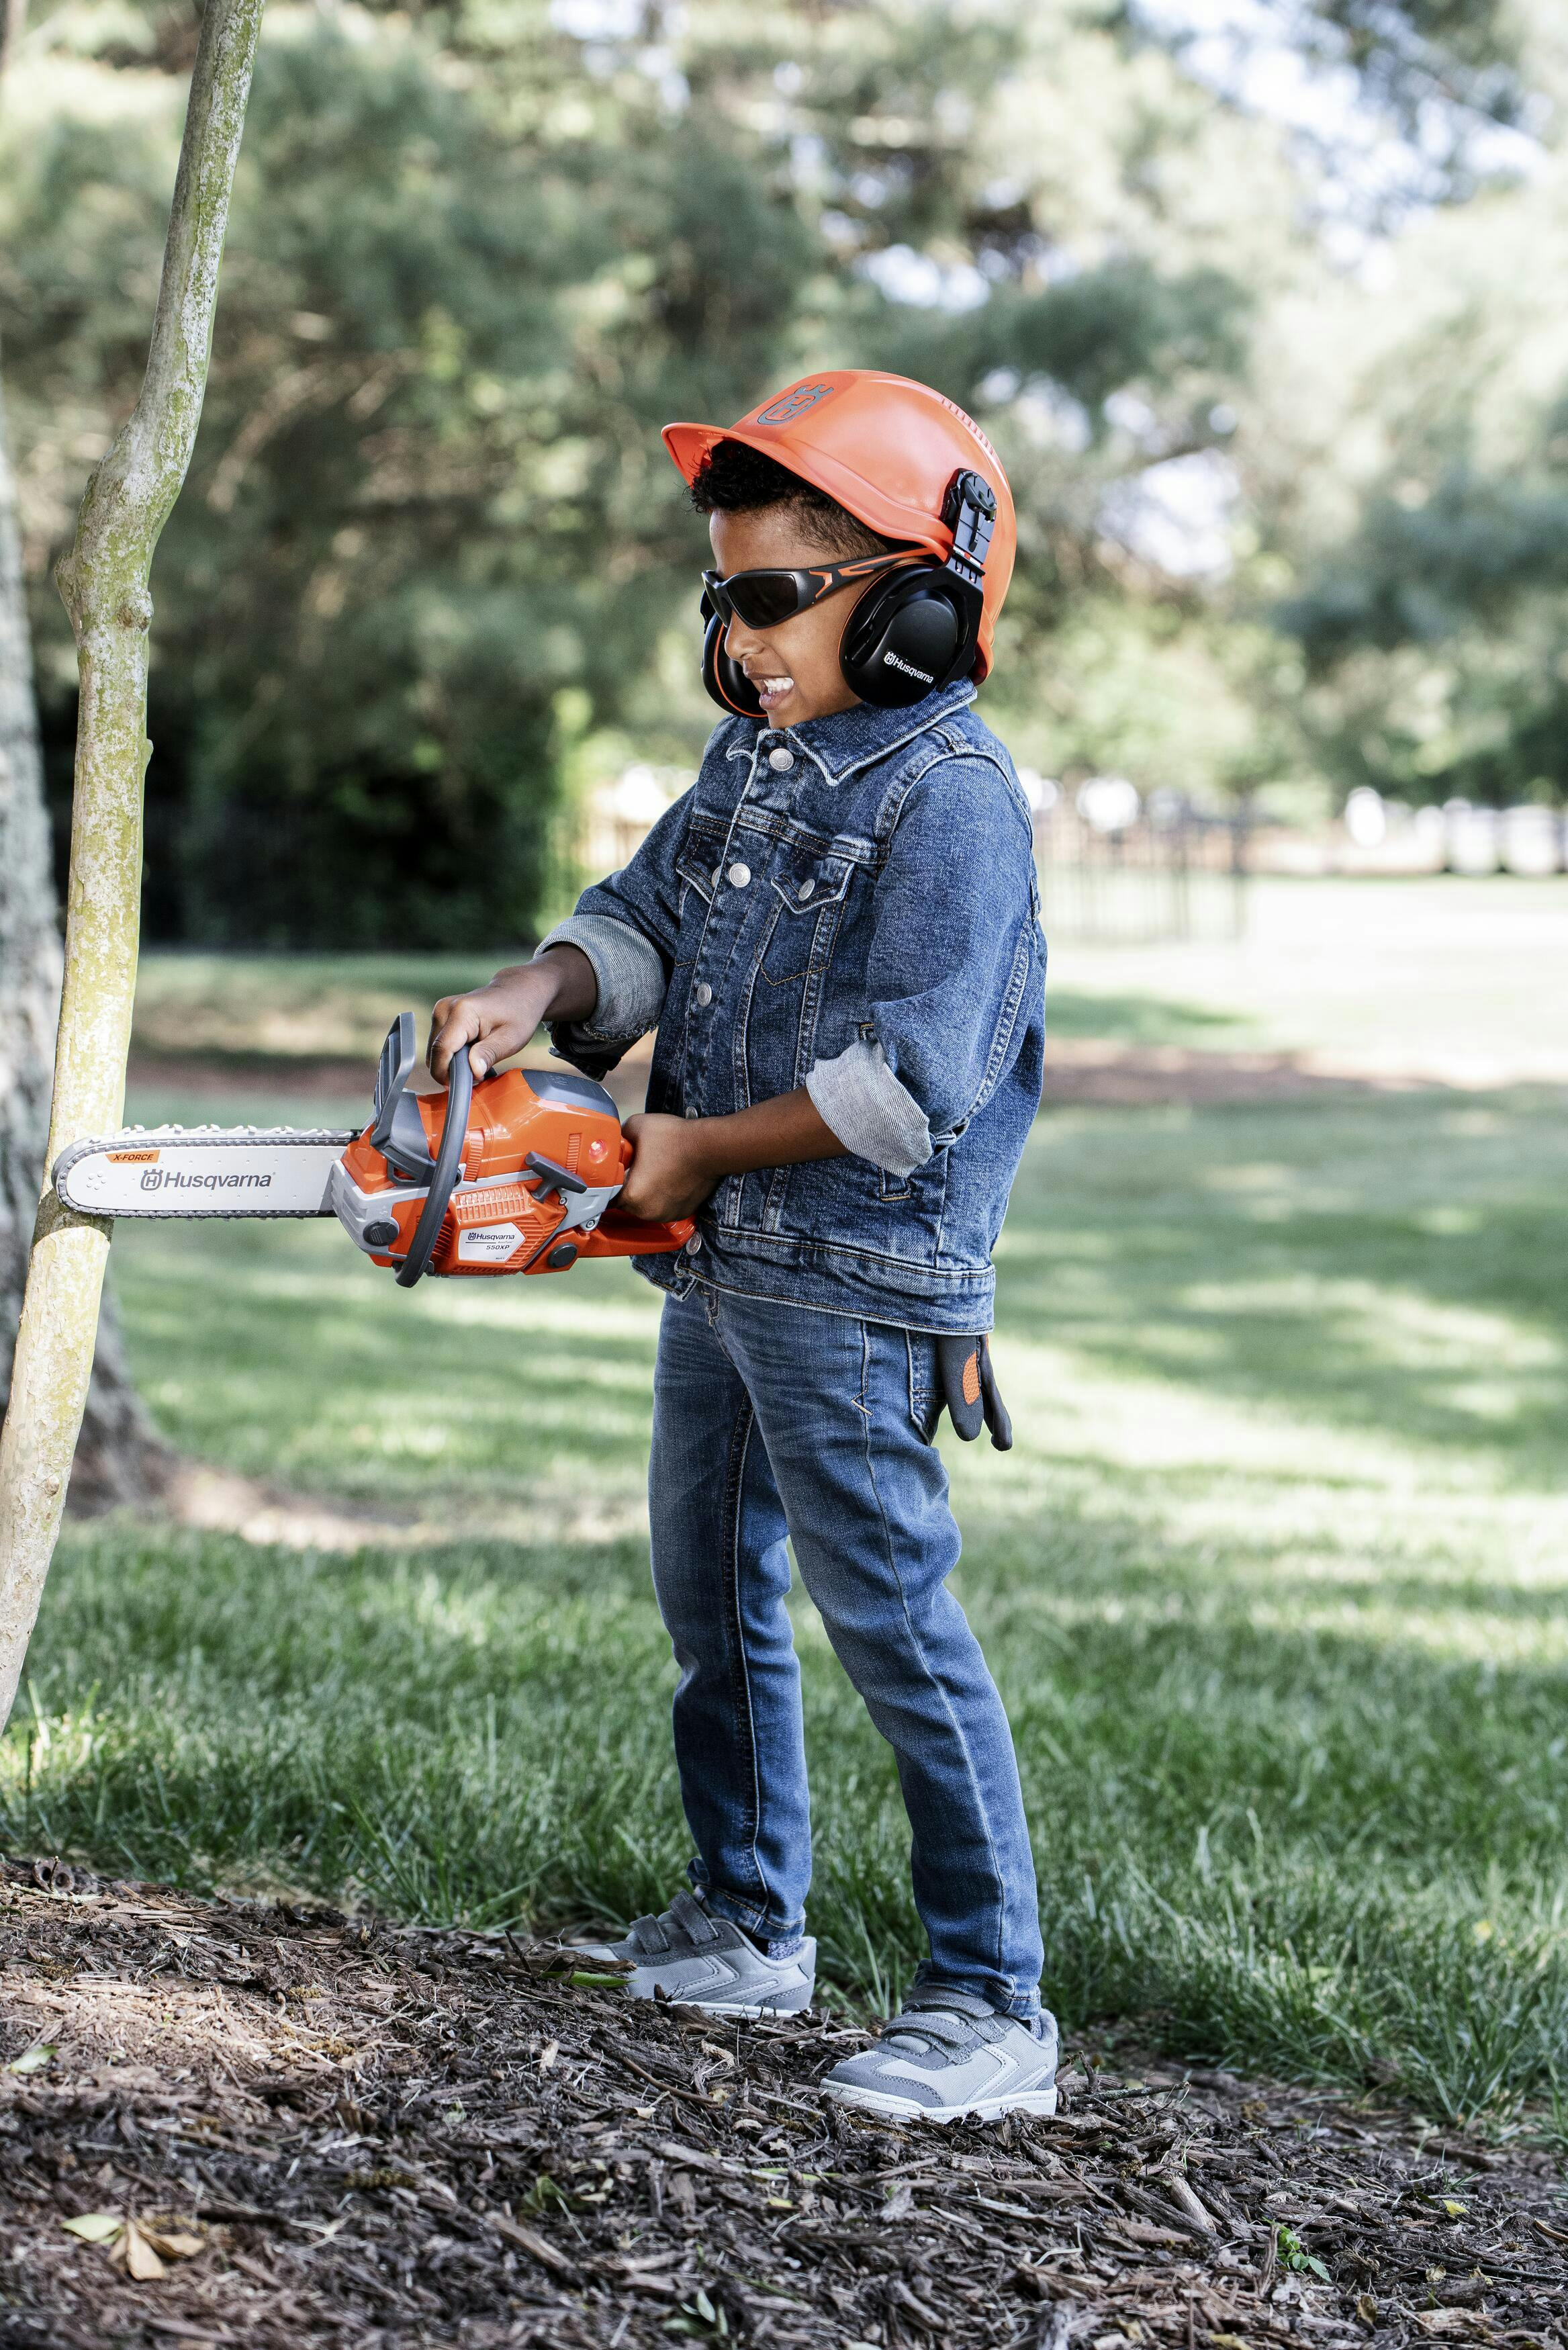 Toy 550XP Chainsaw & PPE Kit